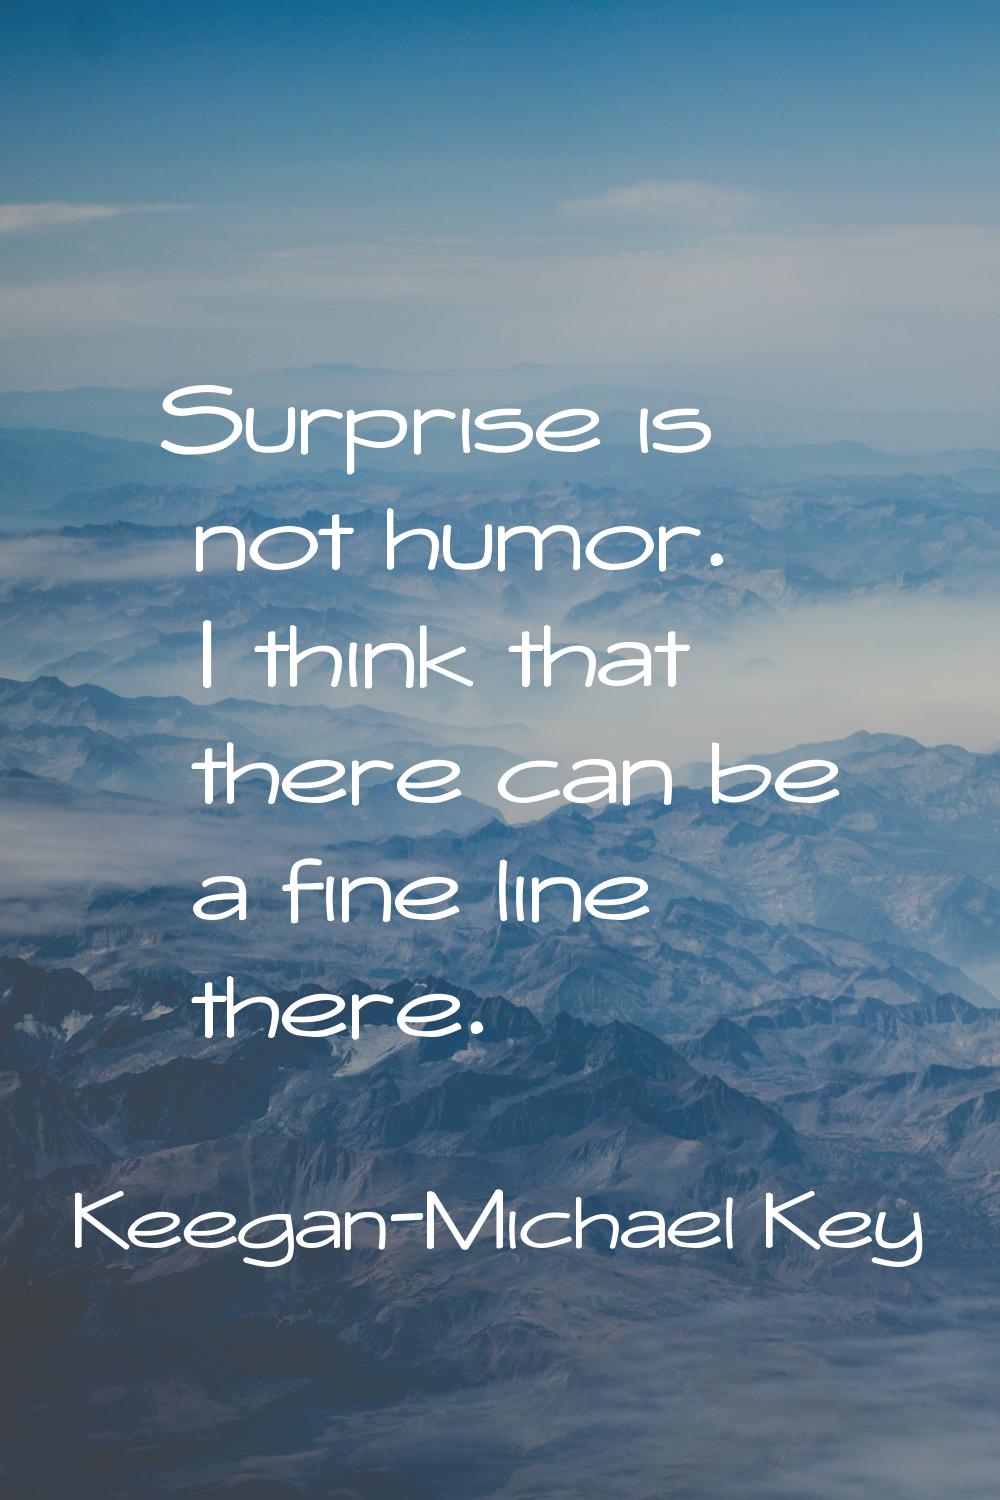 Surprise is not humor. I think that there can be a fine line there.